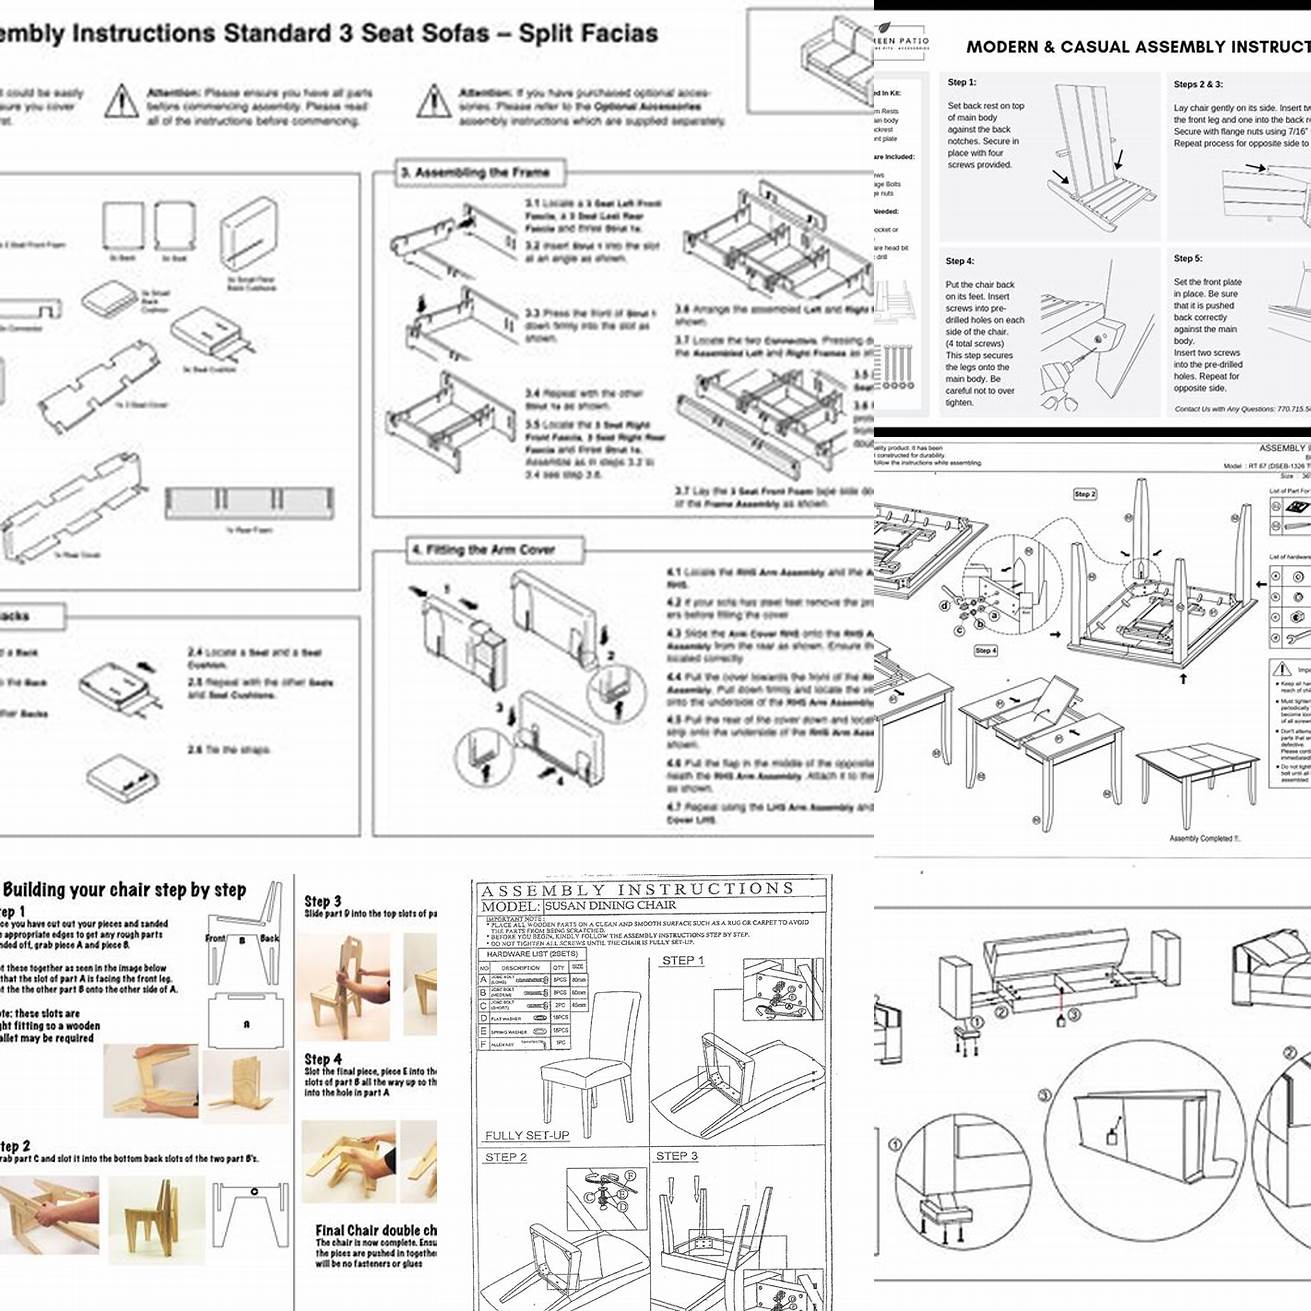 Manufacturers instructions